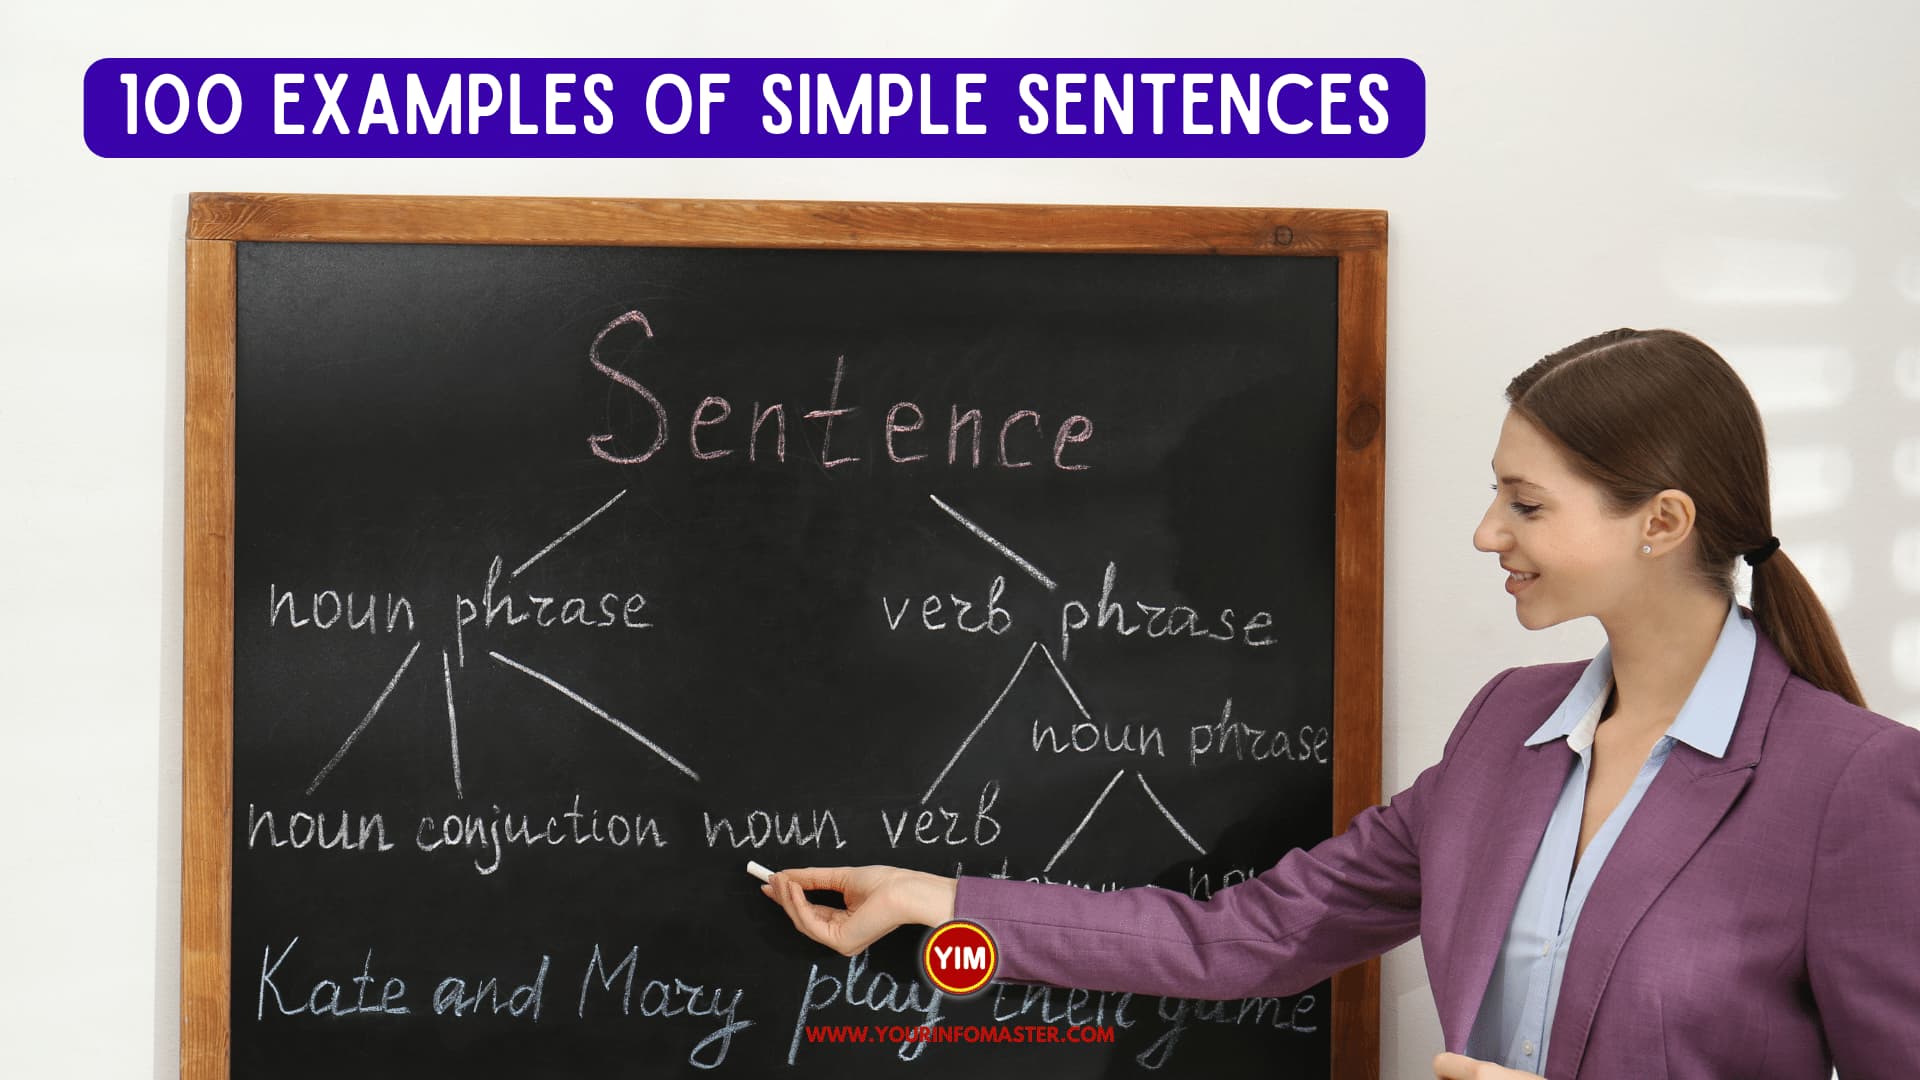 100 Examples of Simple Sentences